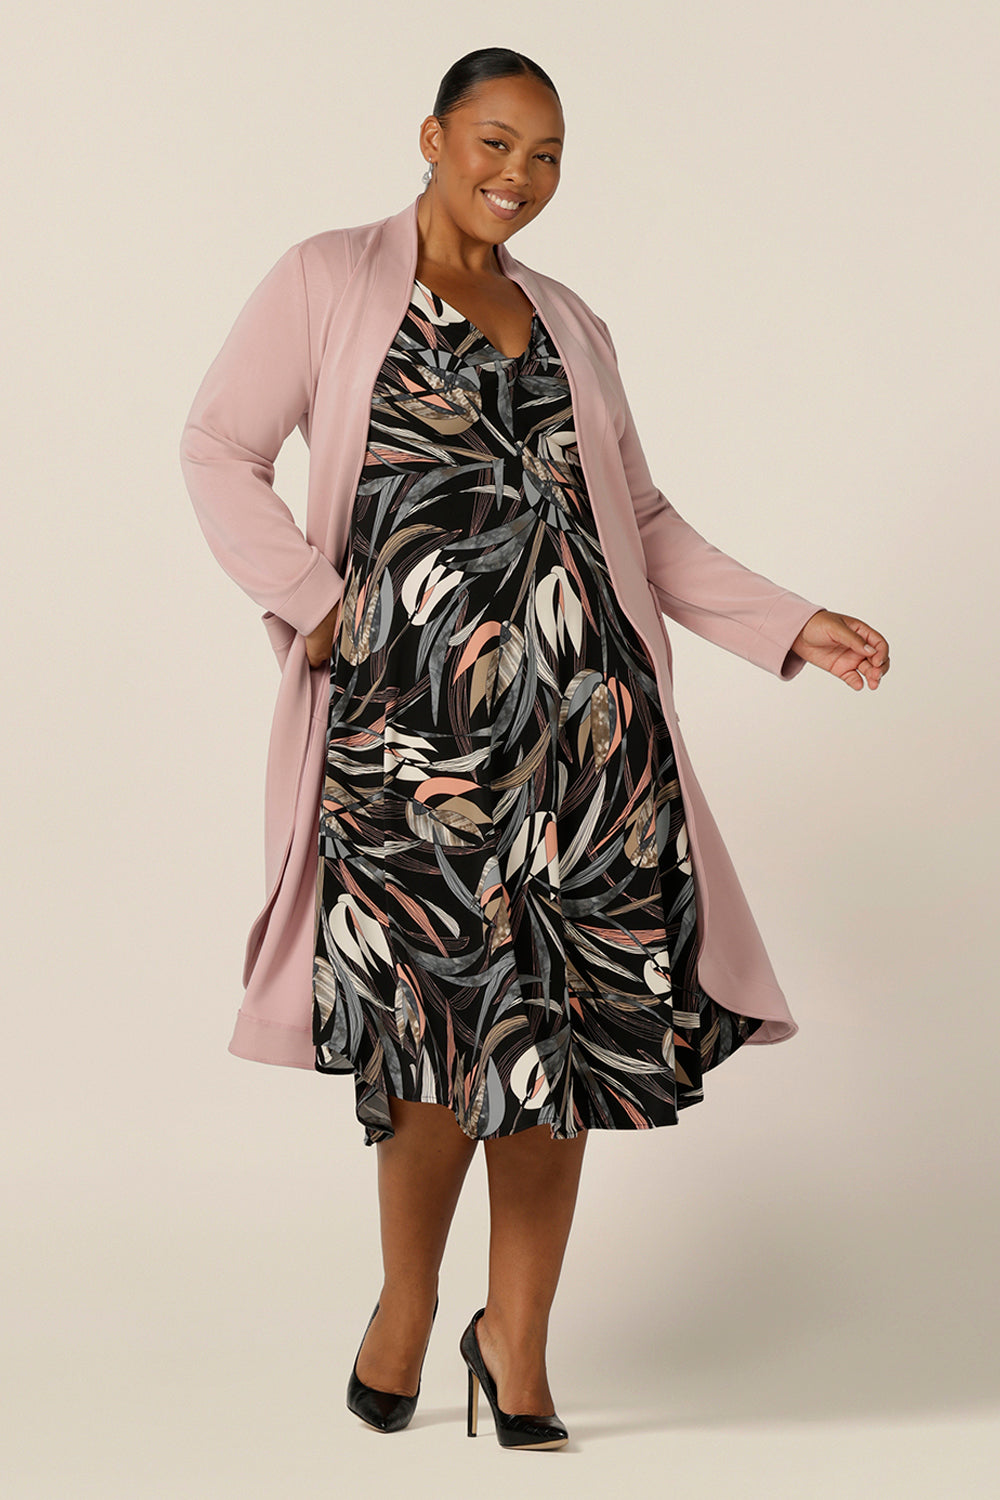 A fuller figure, size 18 woman wears an empire line dress with sweetheart neckline and 3/4 sleeves and pink modal coat. Great for work wear, this twist front dress with midi-length skirt is smart casual office dress style at its best.